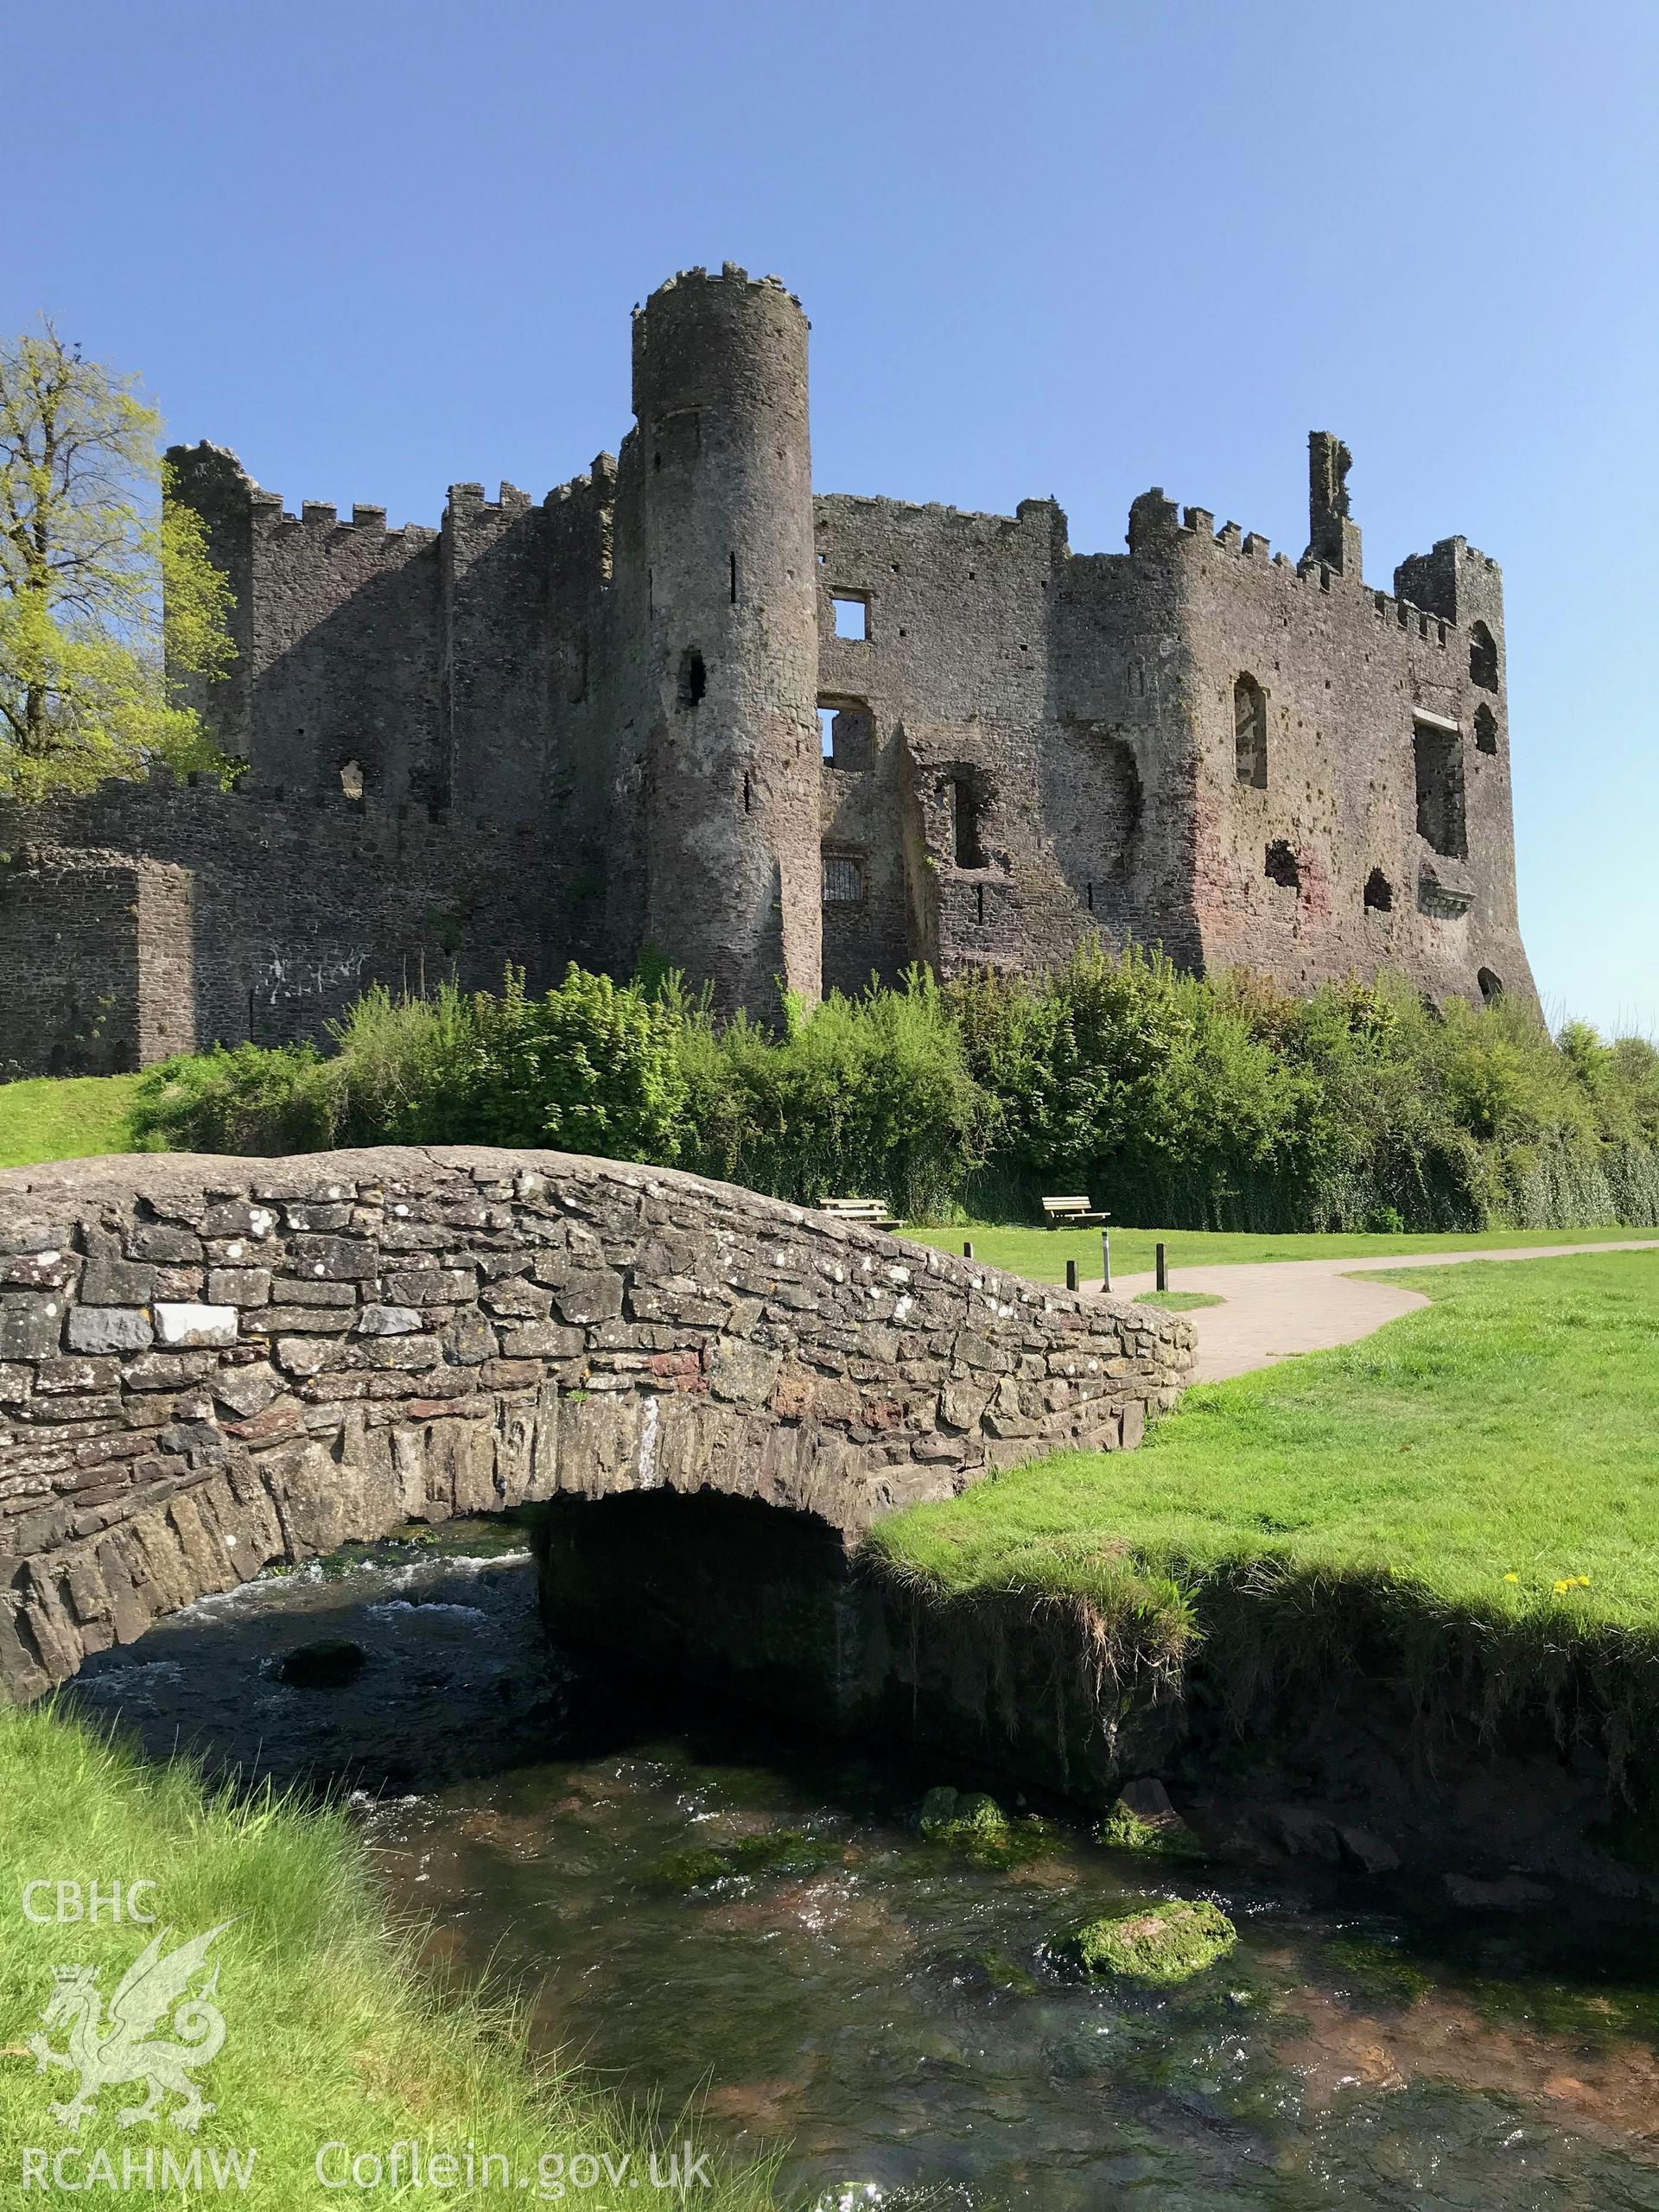 Colour photo showing exterior view of Laugharne Castle, taken by Paul R. Davis, 6th May 2018.